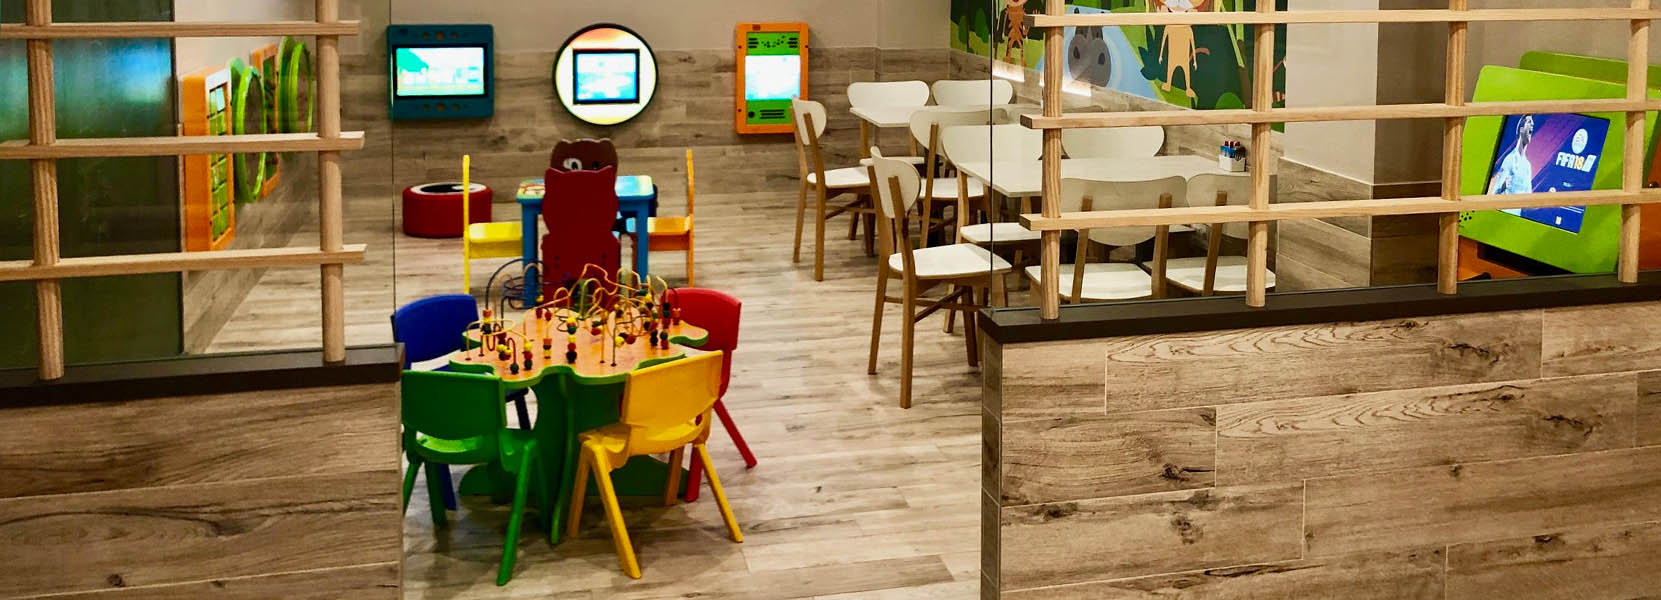 On this image you can see a kids' corner with kids' furniture